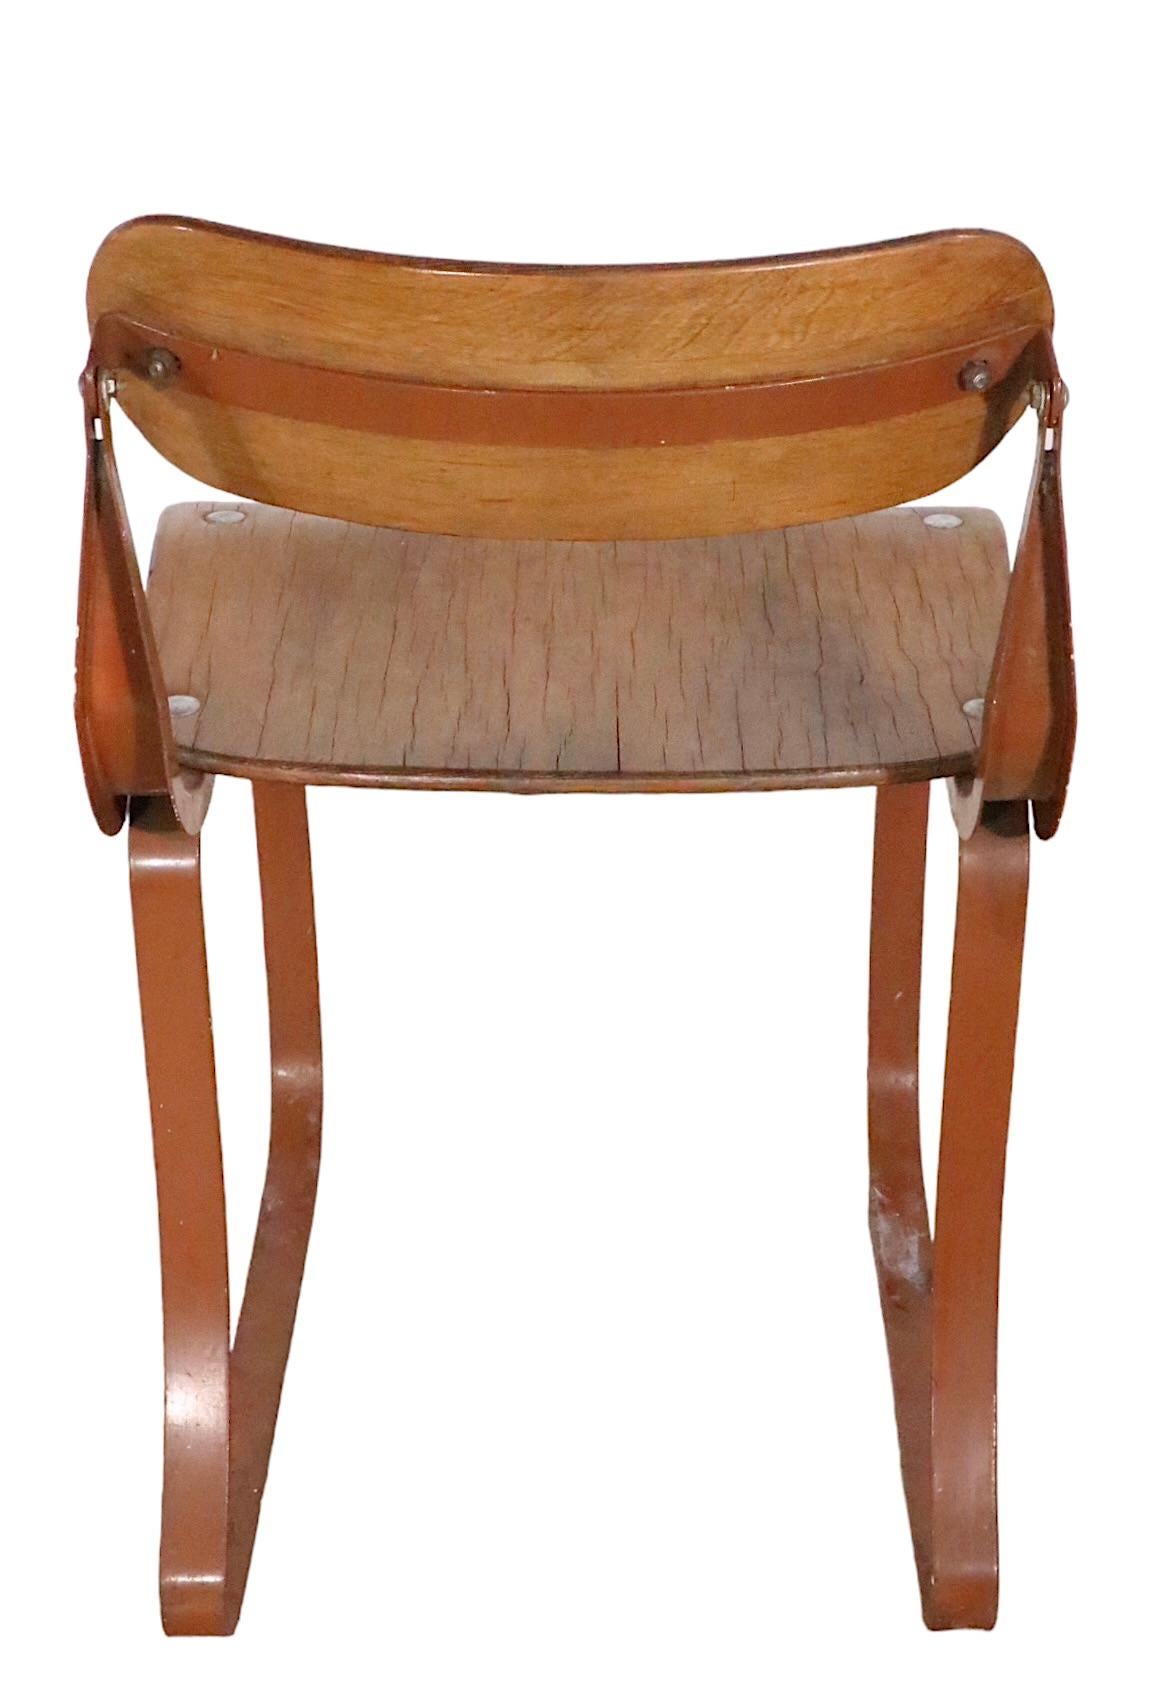 Mid-20th Century Art Deco Health Chair by Herman Sperlich for The Ironrite Corp. circa 1930's